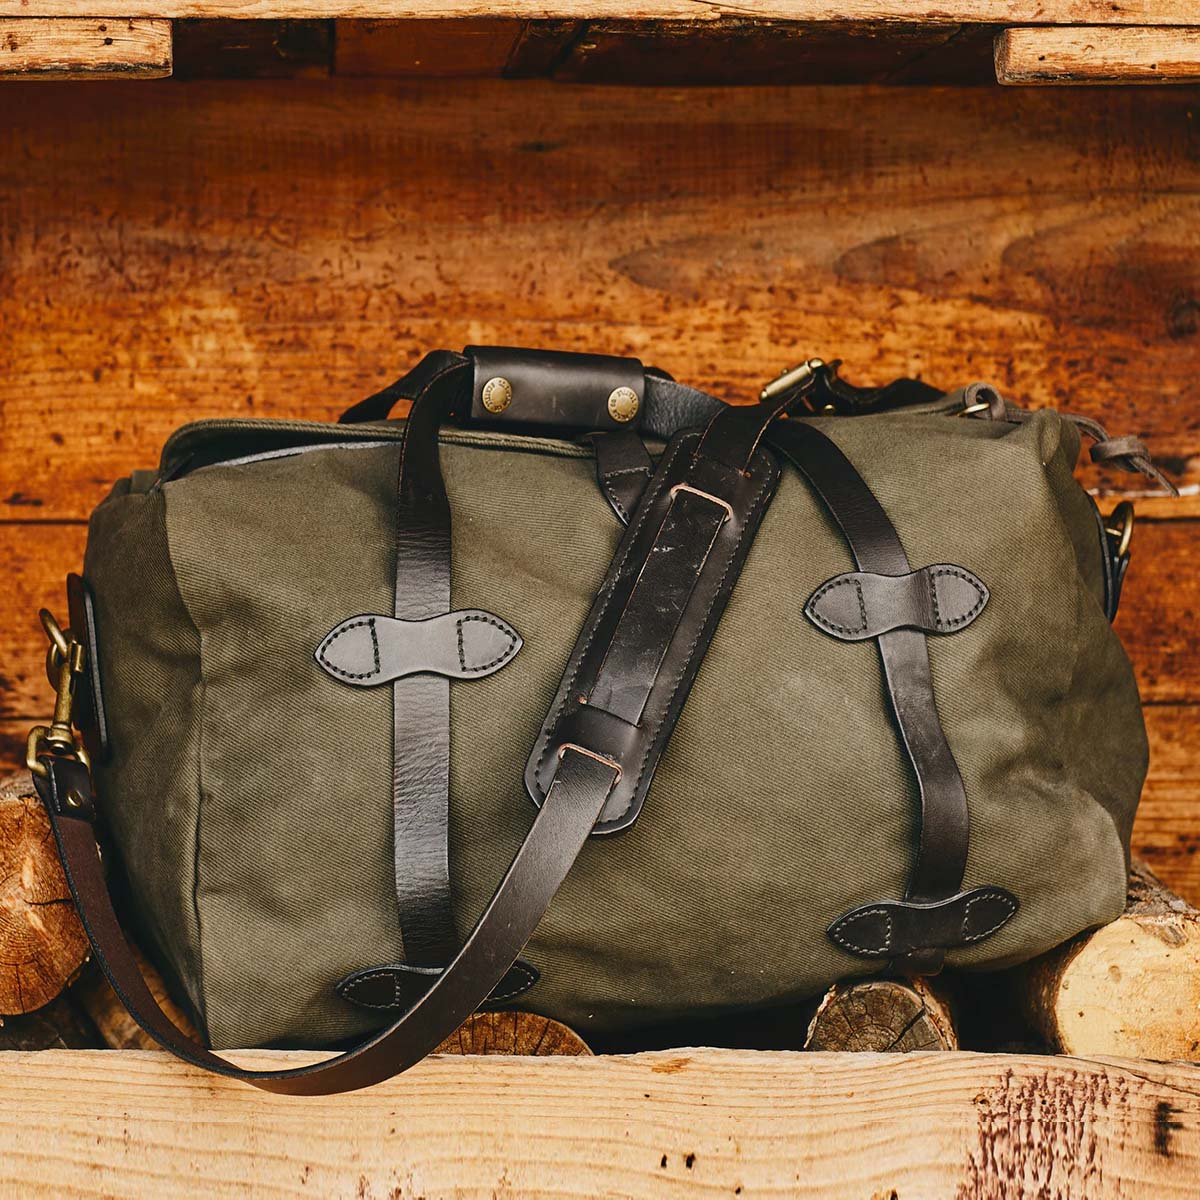 Filson Rugged Twill Duffle Bag Small Otter Green, travelbag made for heavy-duty trips